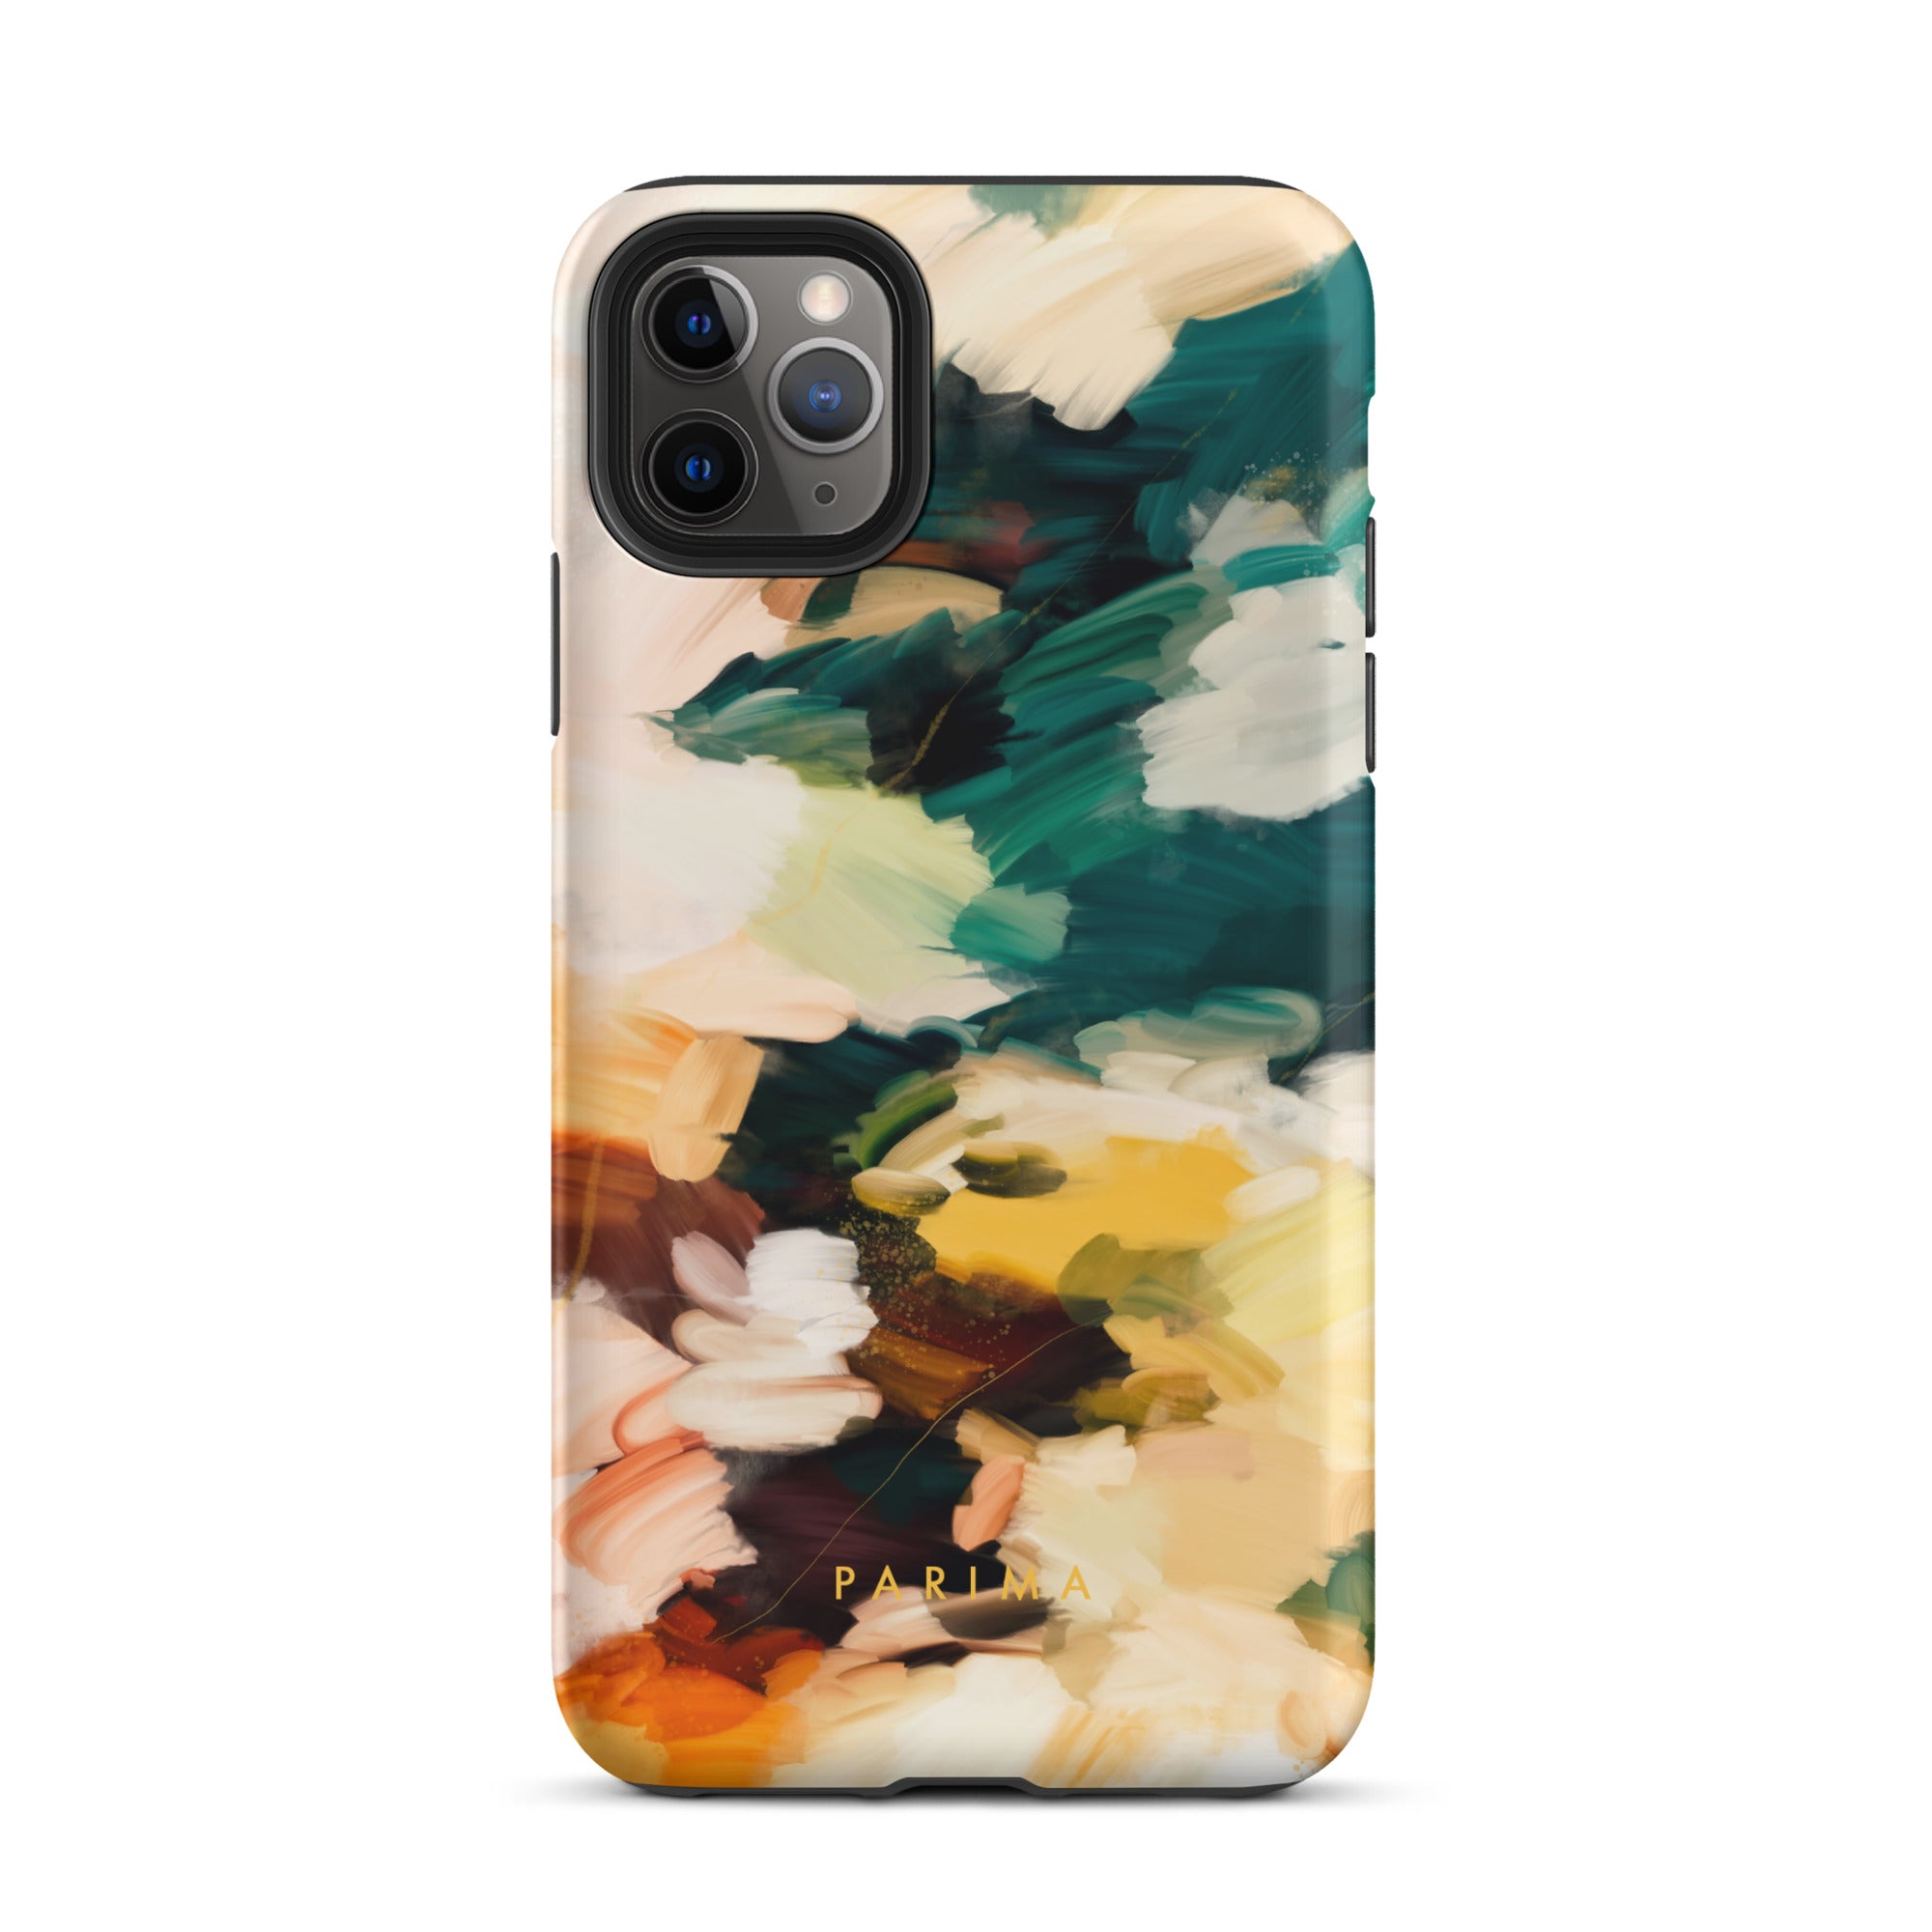 Cinque Terre, green and yellow abstract art - iPhone 11 Pro Max tough case by Parima Studio